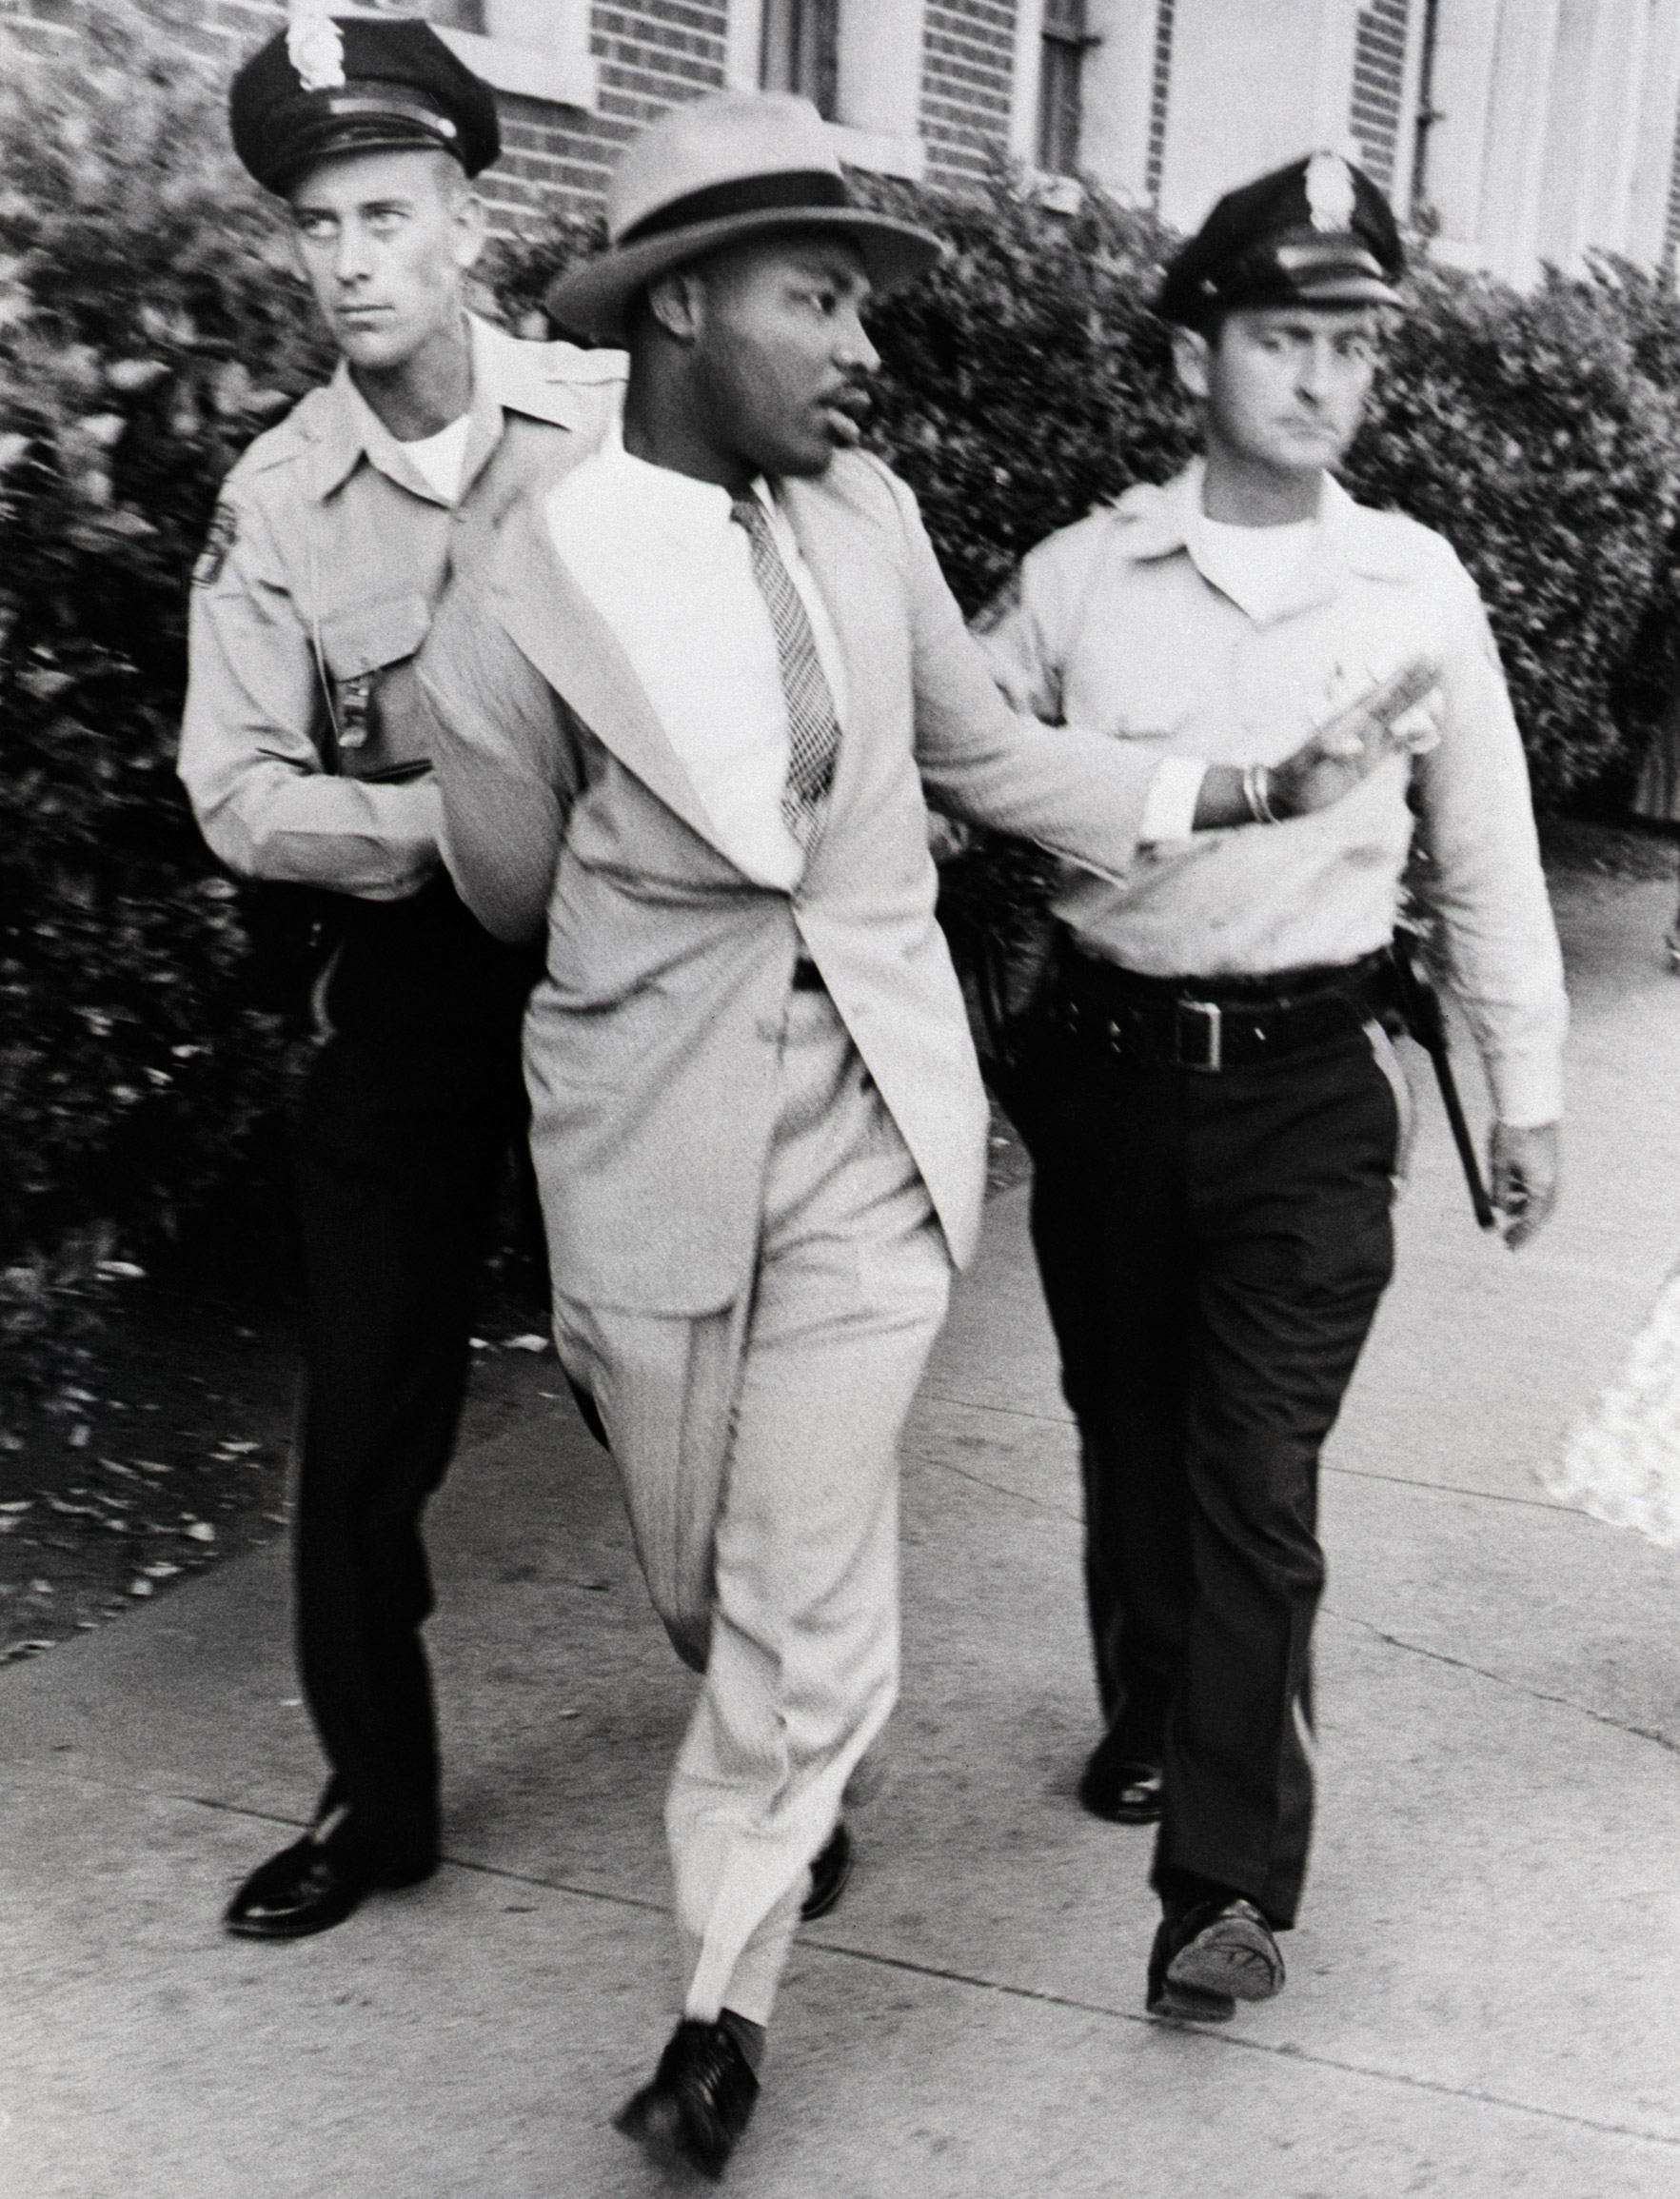 Police Arresting Martin Luther King in 1958.